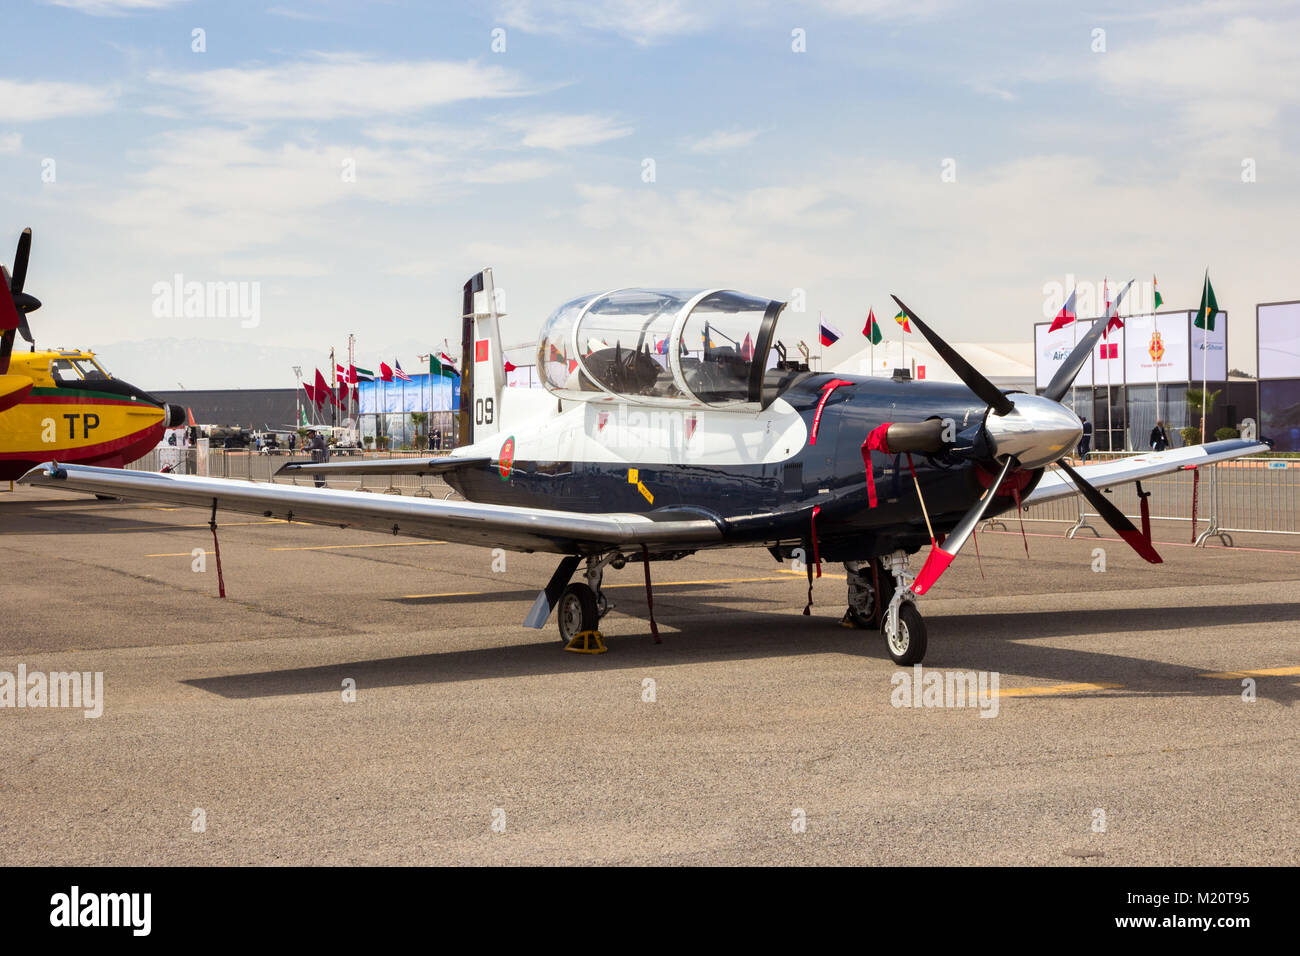 MARRAKECH, MOROCCO - APR 28, 2016: Royal Moroccan Air Force Beechcraft T-34 Mentor training plane on display at the Marrakech Air Show Stock Photo